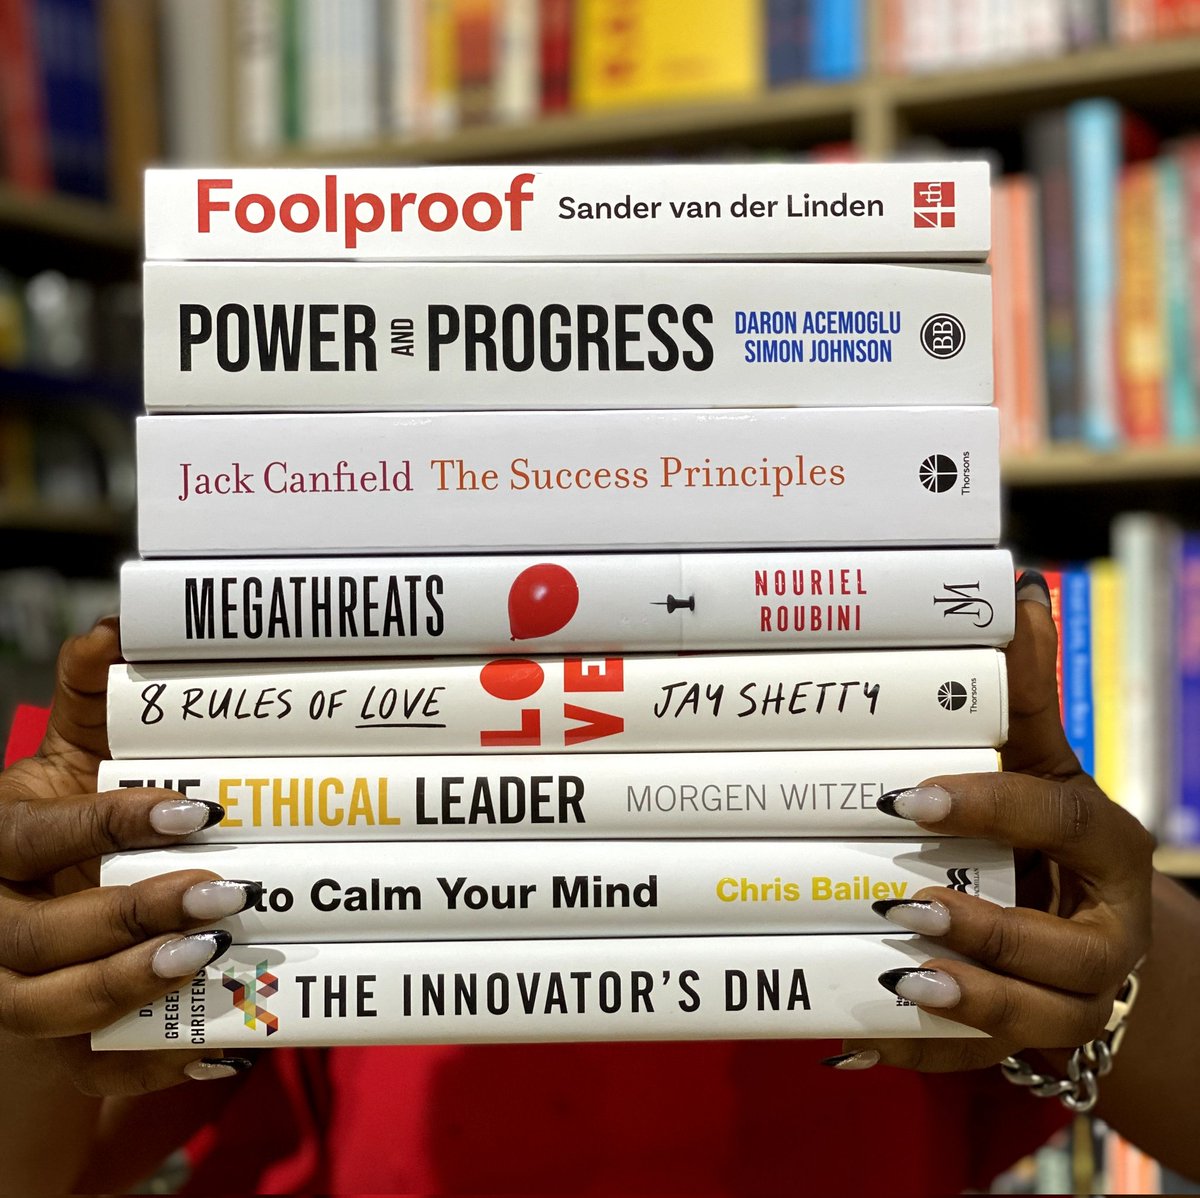 Knowledge is power and these Non-fiction books are packed with it💪🏾📚🤍

#Foolproof NGN 10,000
#PowerAndprogress NGN 10,000
#ThesuccessPrinciples NGN 8000
#Megathreats NGN 10,000
#8rulesofLove NGN 11,000
#TheEthicalleader NGN 12,000
#Howtocalmyourmind NGN 11,000